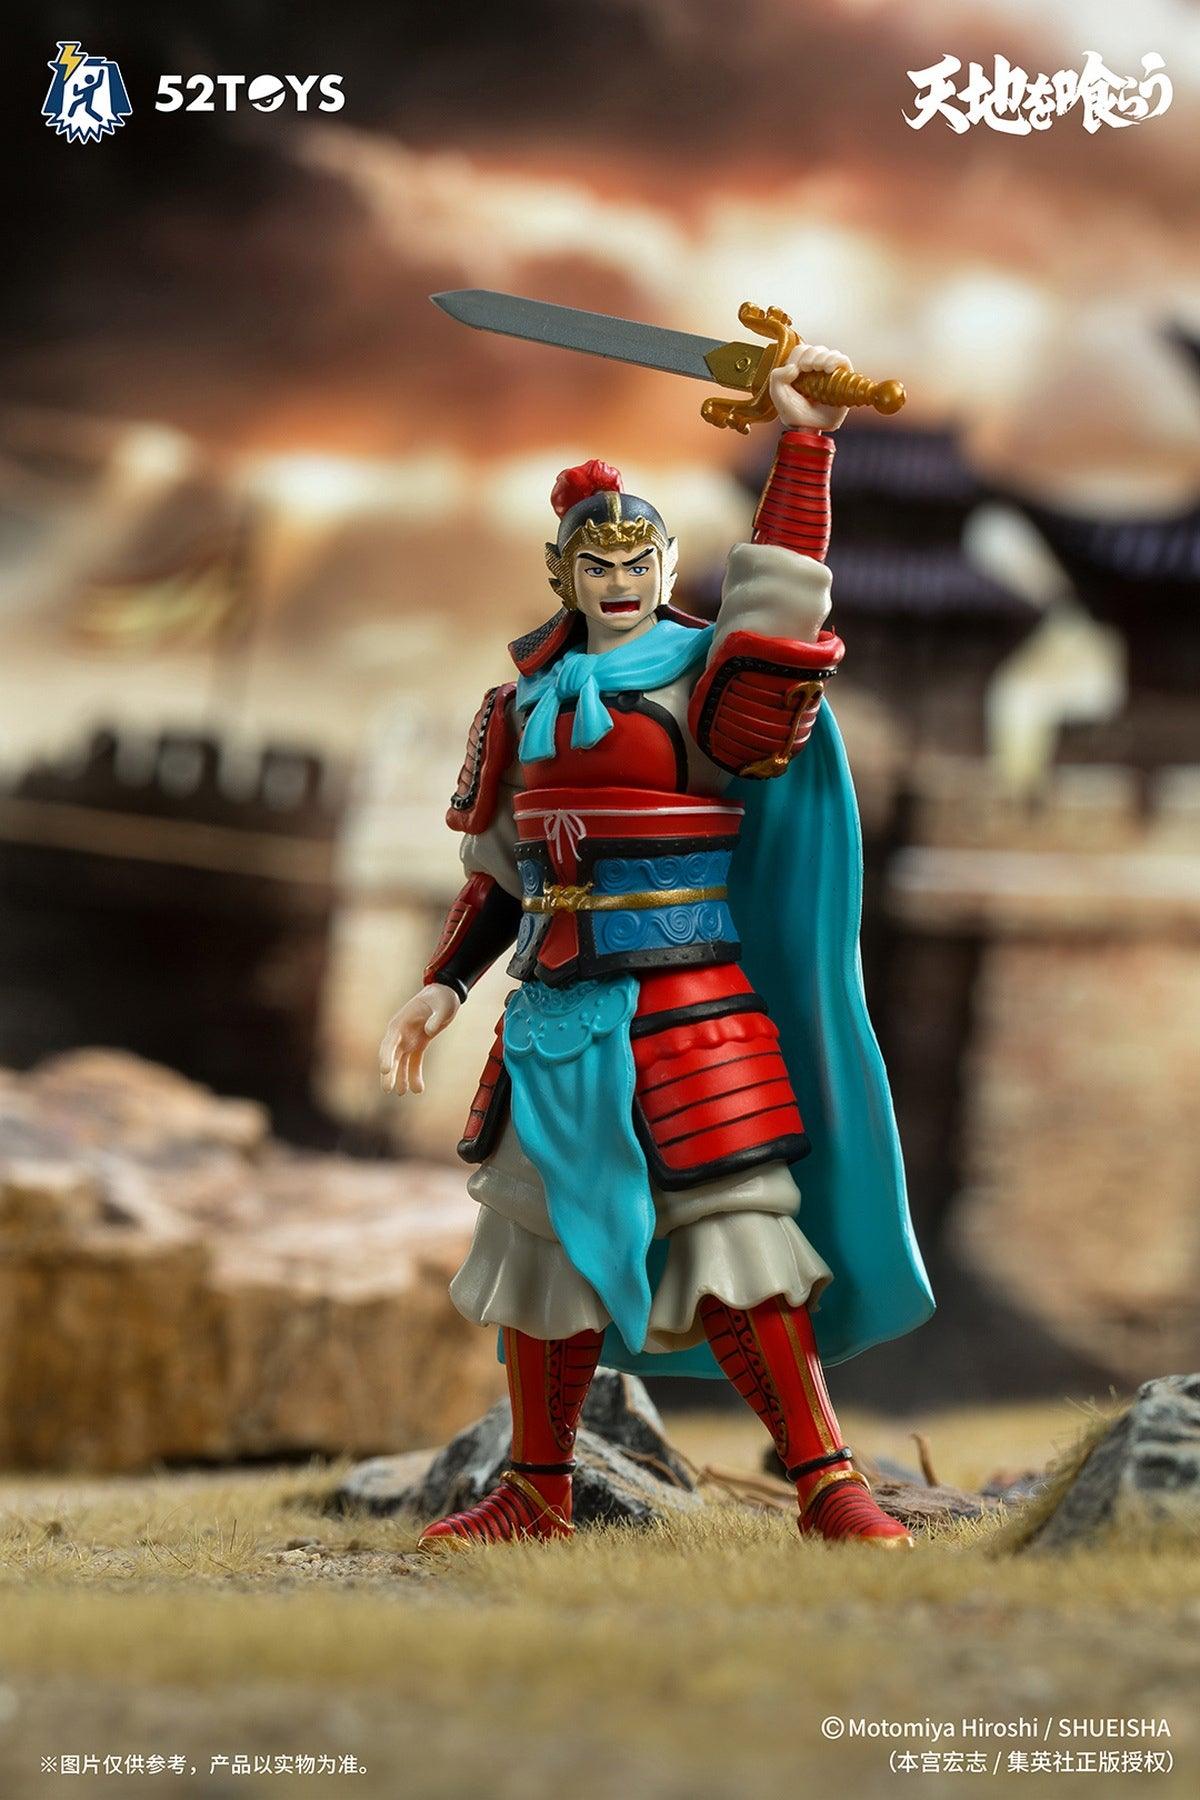 52Toys - 1:18 Liu Bei (Dynasty Wars) Action Figure